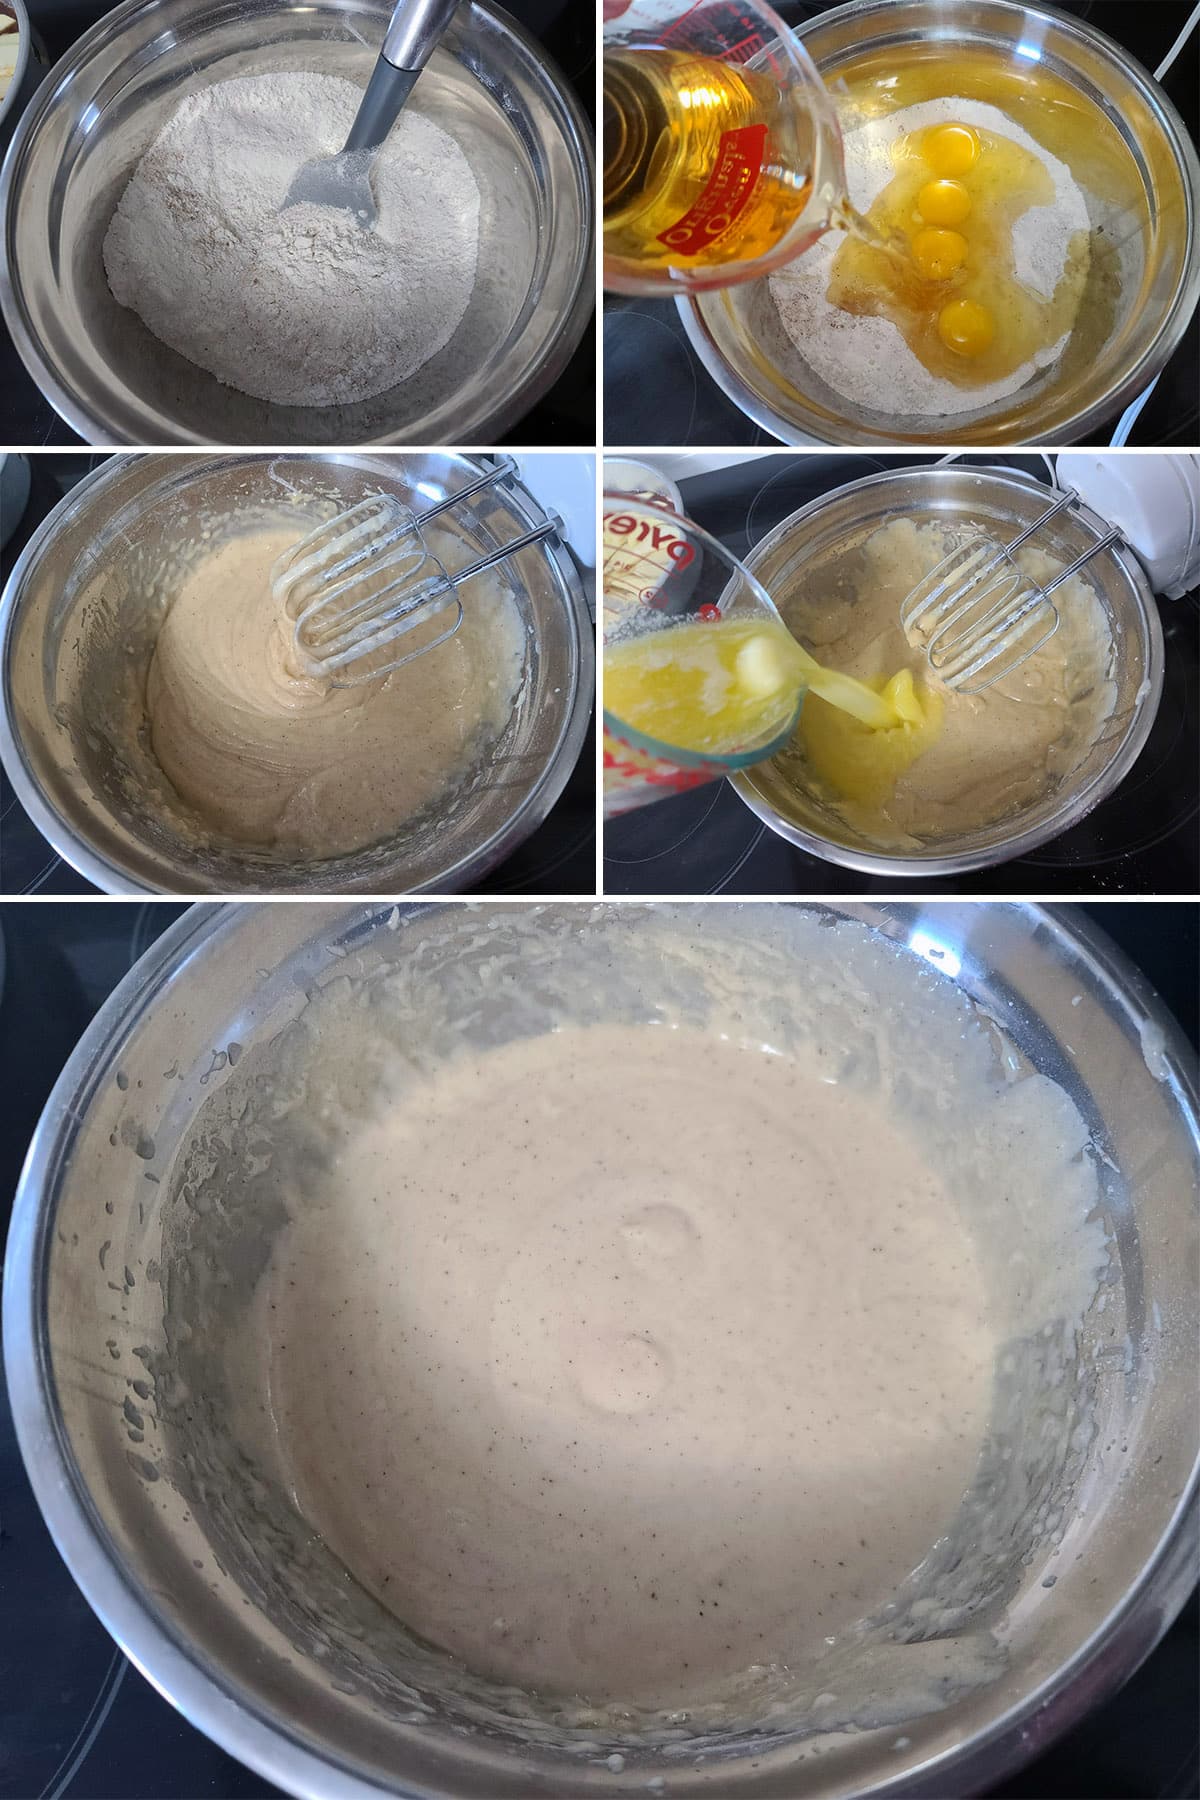 A 5 part image showing the batter being made.